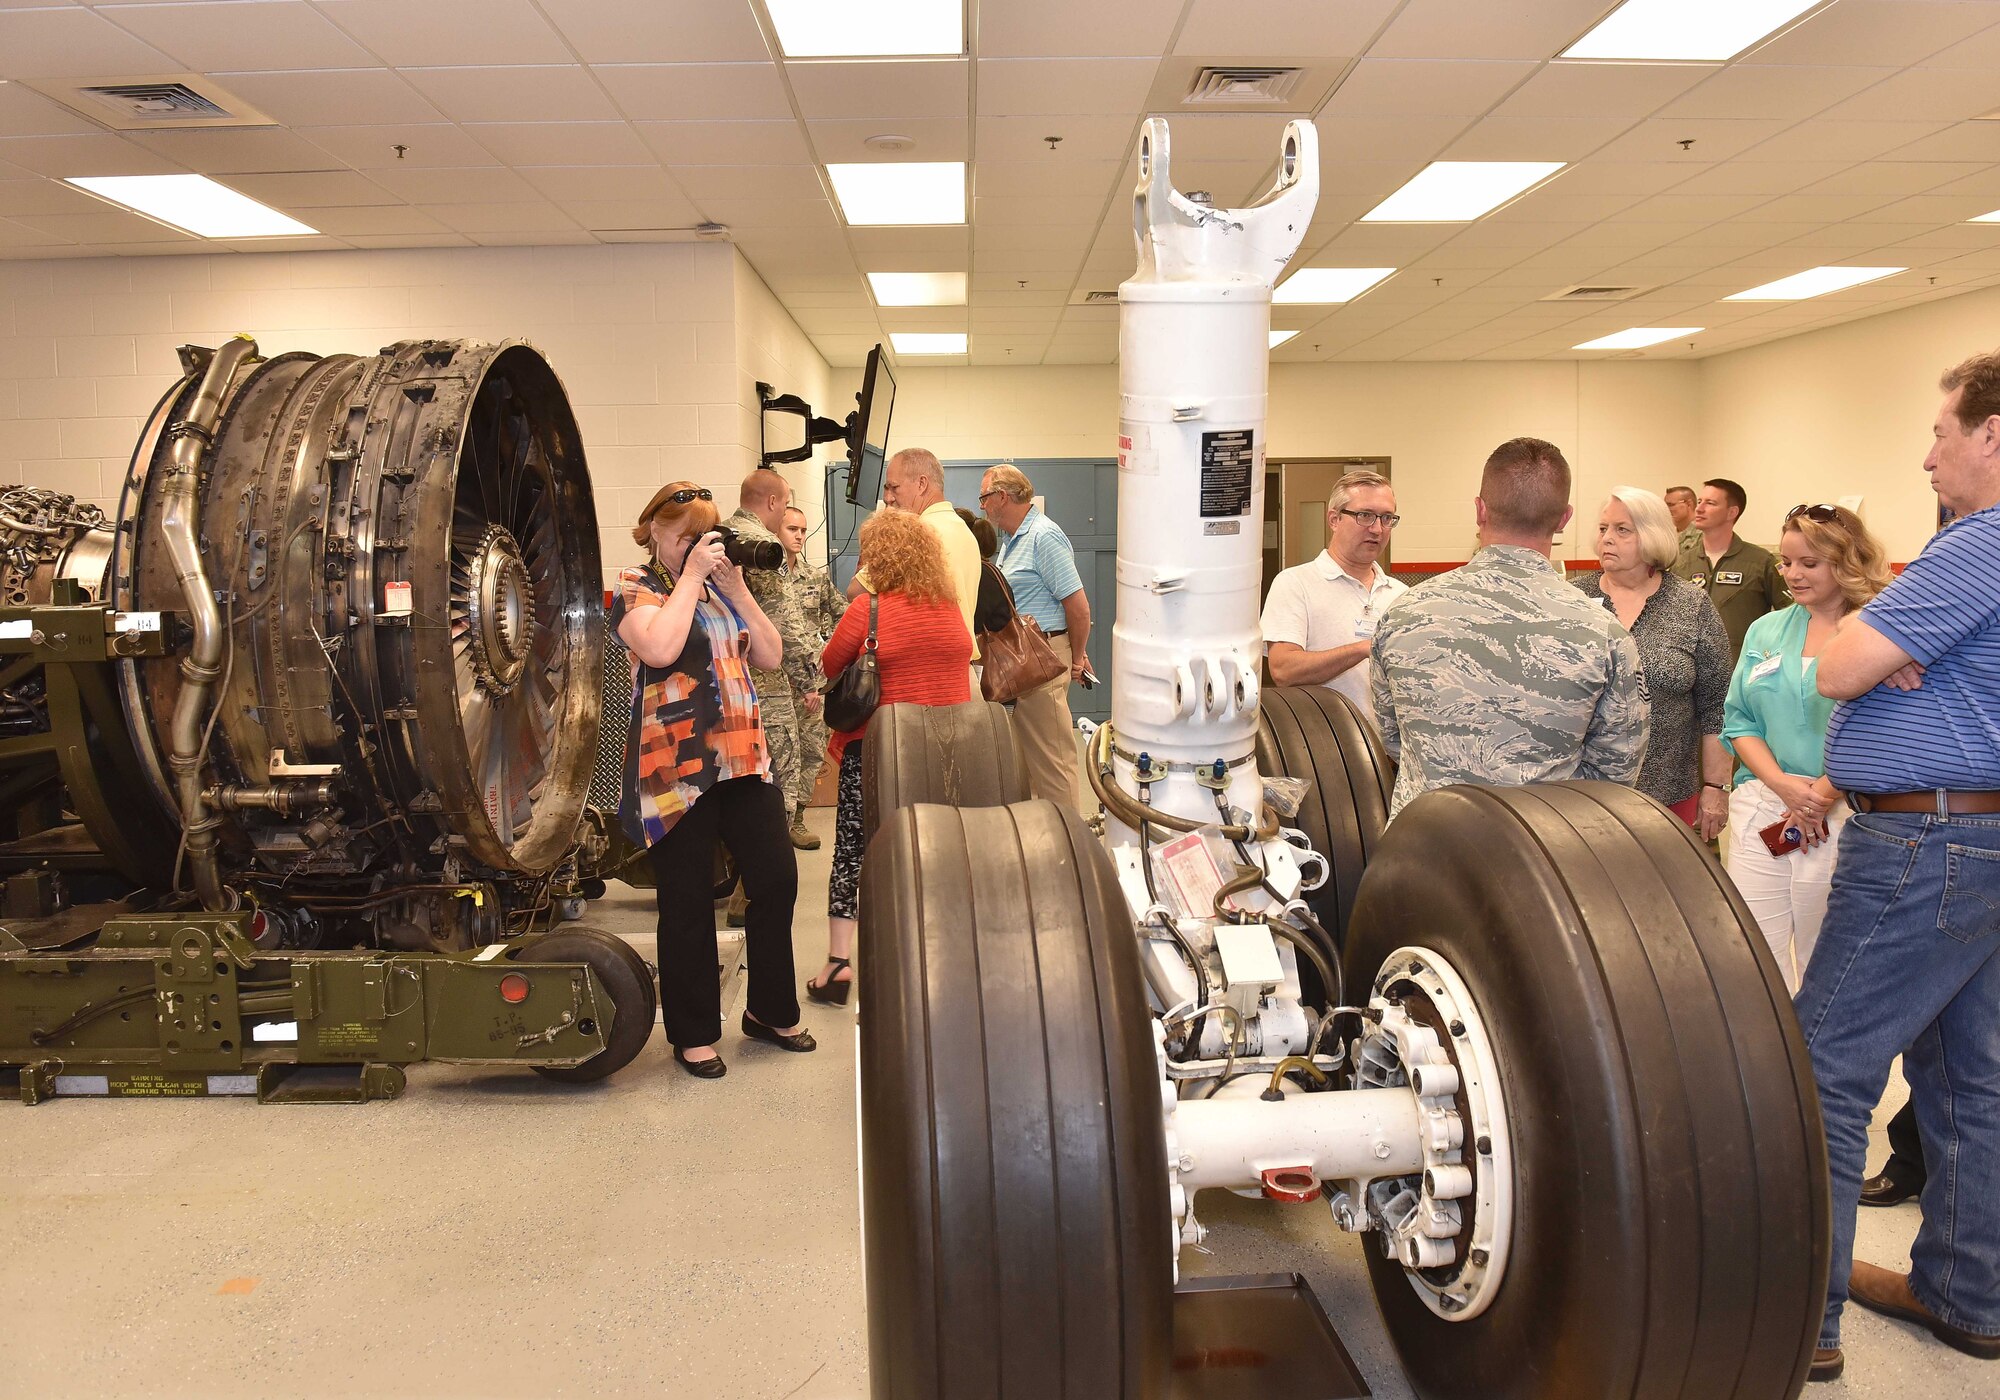 Civic leaders from Little Rock Air Force Base, Arkansas, tour a 22nd Maintenance Group maintenance qualification training program classroom July 27, 2018, at McConnell AFB, Kansas. The tour included mission briefings from three wing commanders, information on the upcoming KC-46 Pegasus, as well as a tour of a KC-135 Stratotanker. (U.S. Air Force photo by Staff Sgt. David Bernal Del Agua)